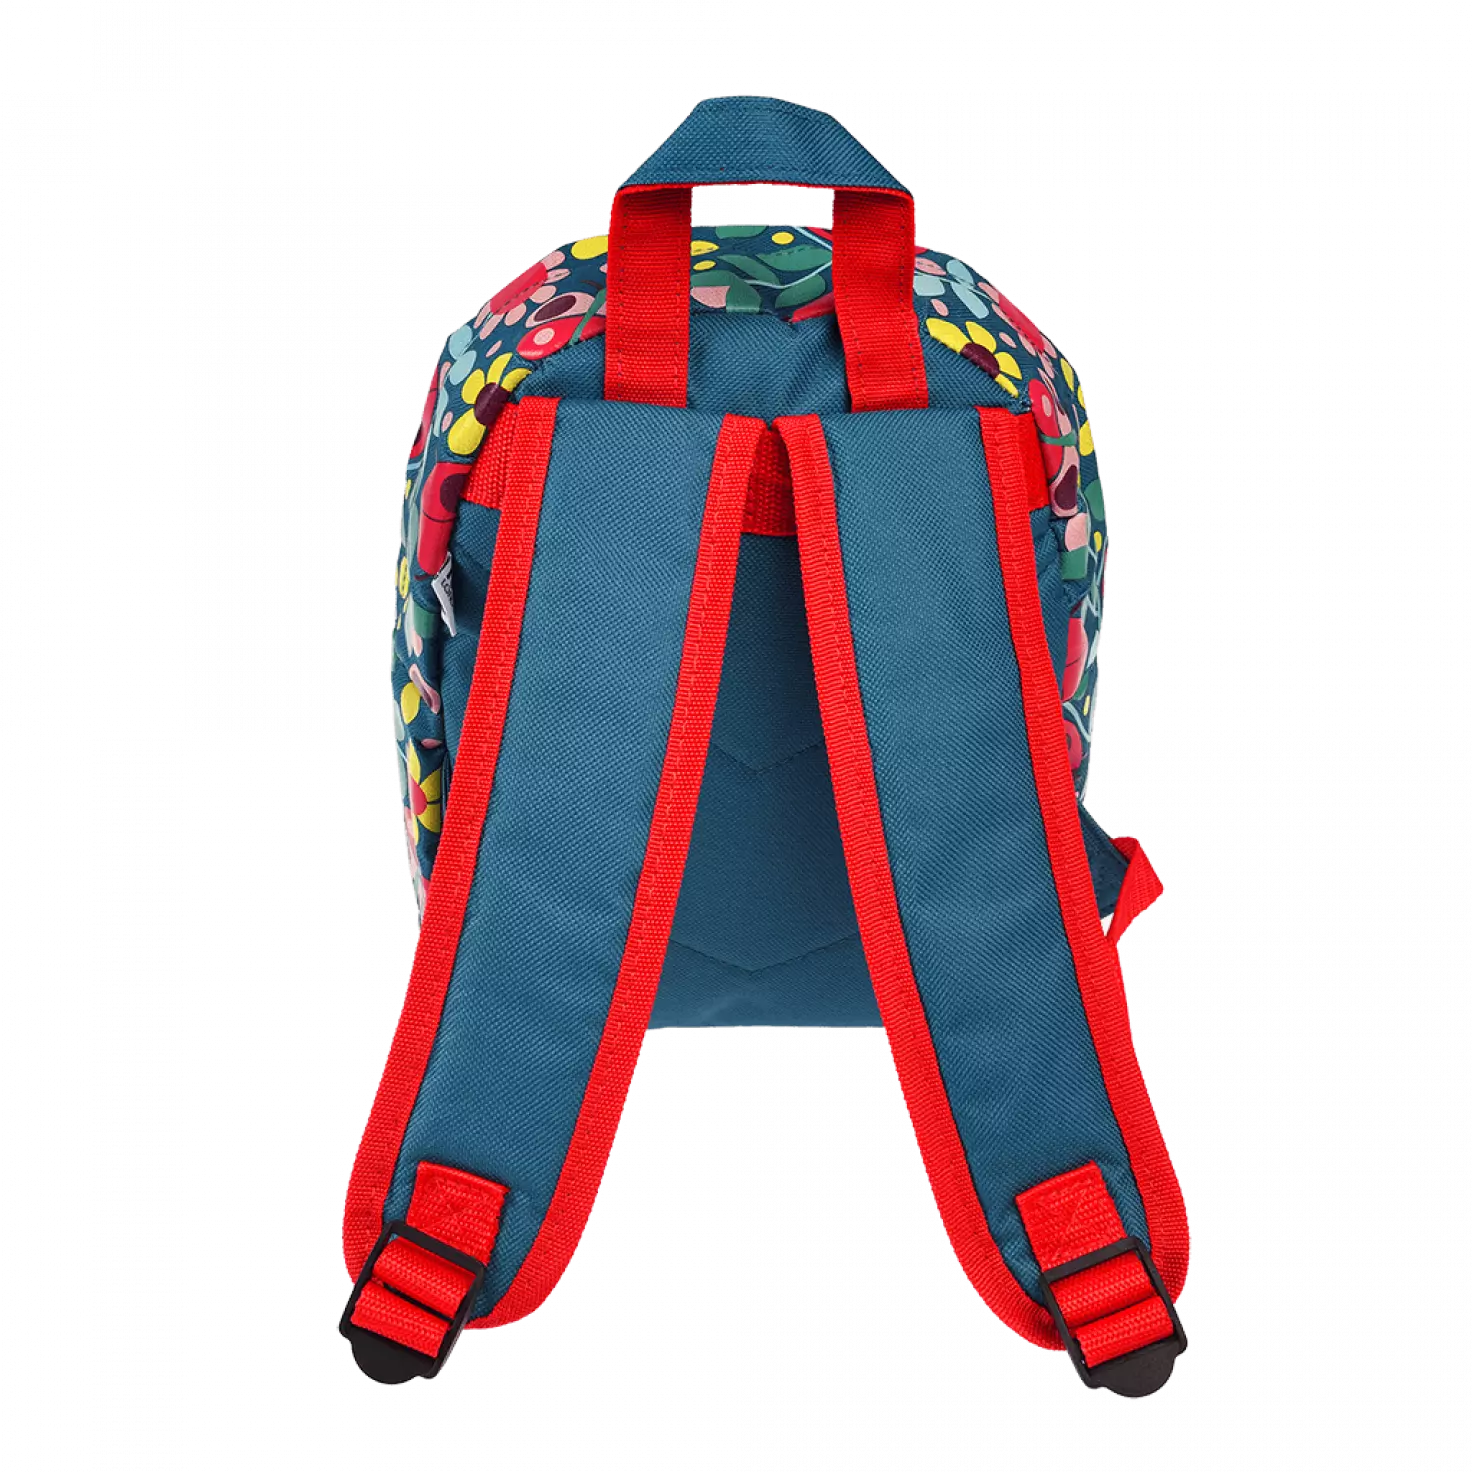 A childs backpack by Rex London, style Ladybird, in blue with multi ladybird and floral print. Two compartments with zip fastening. Back view showing padded straps.